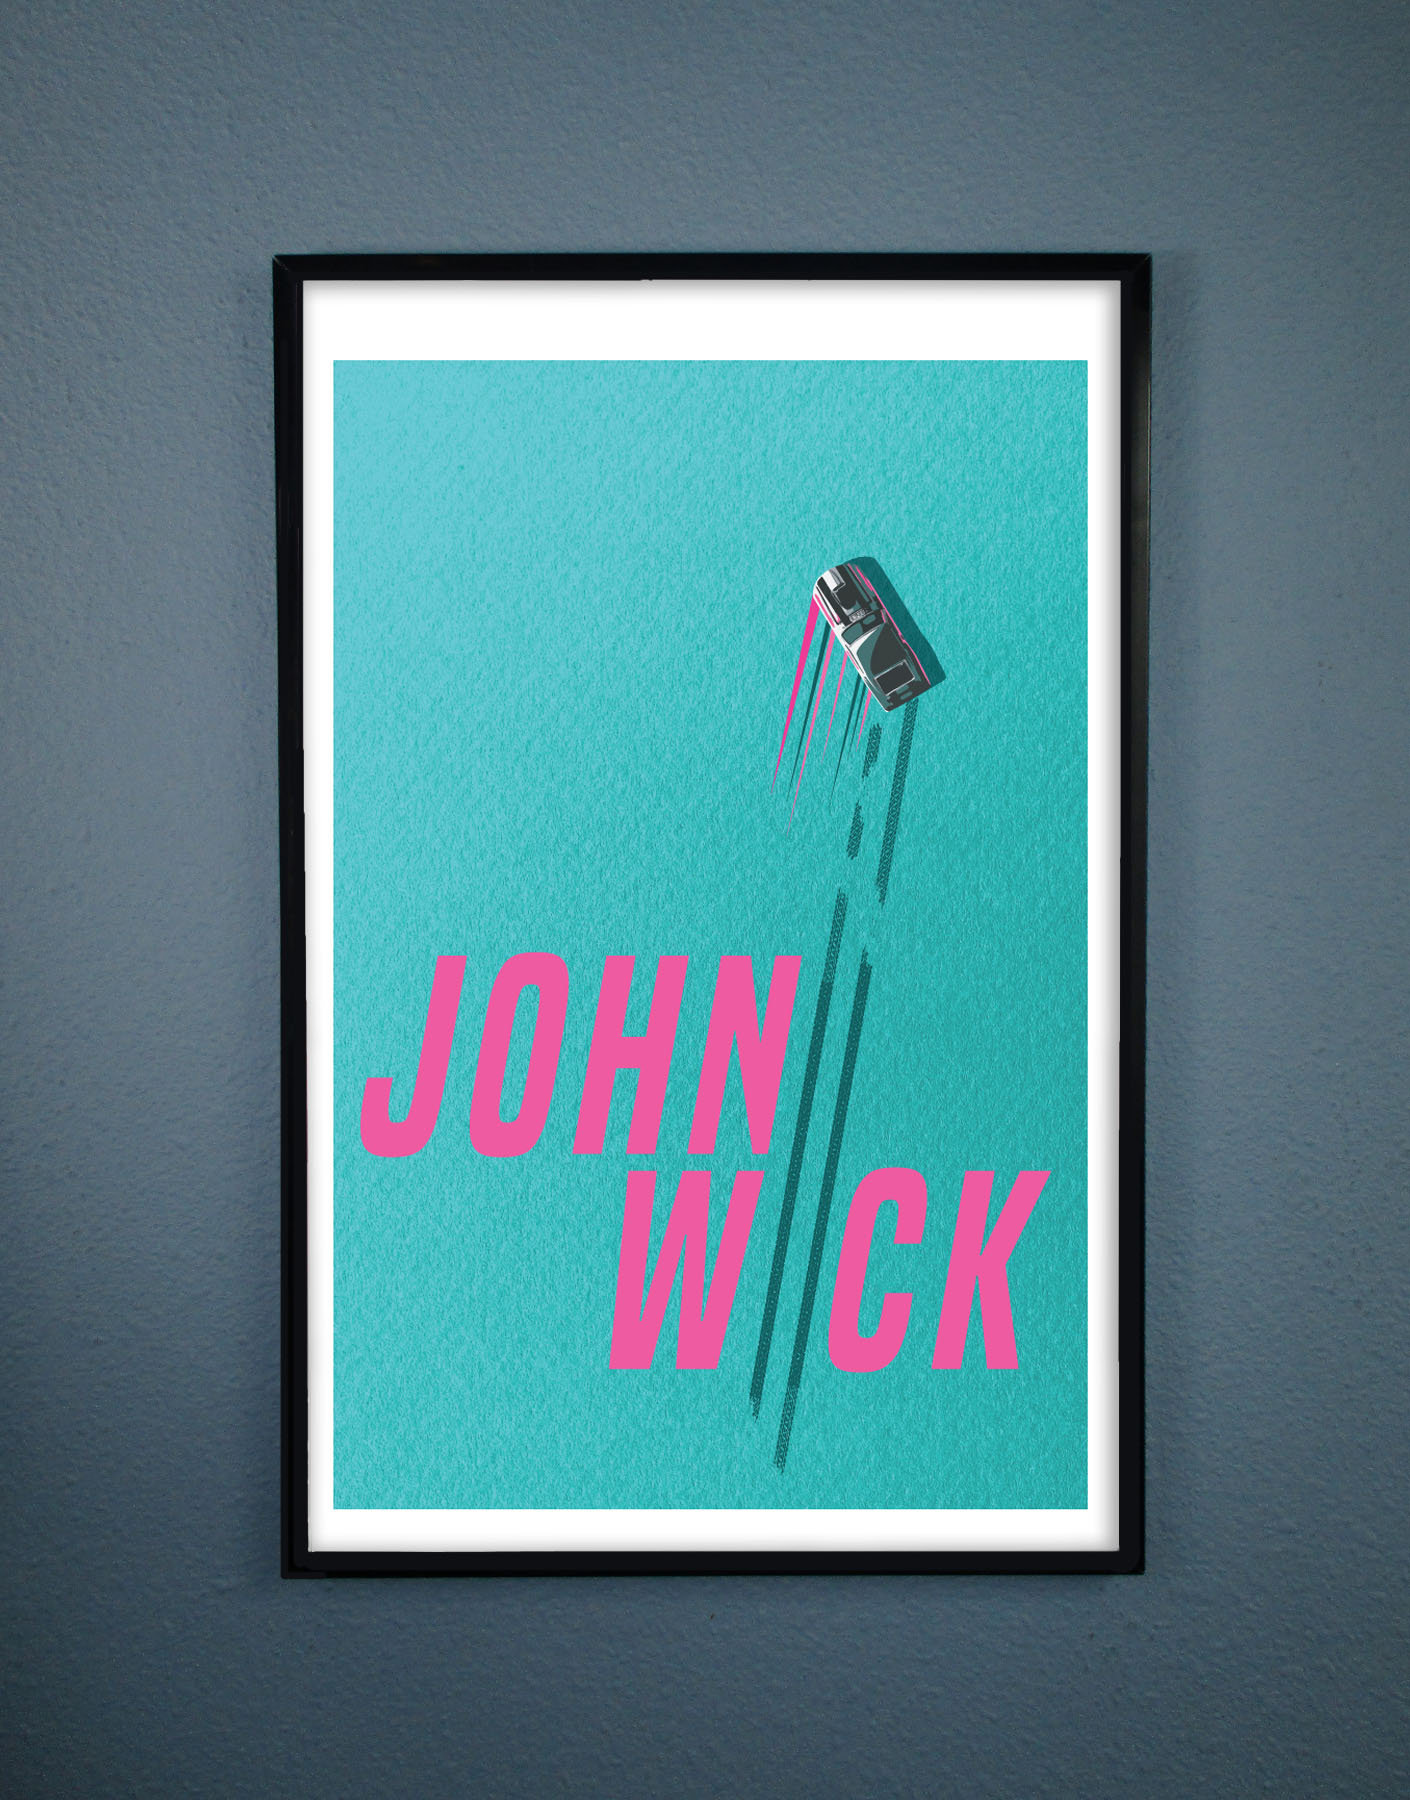 Minimalist John Wick Poster For Keanu Reeves And John Wick Etsy